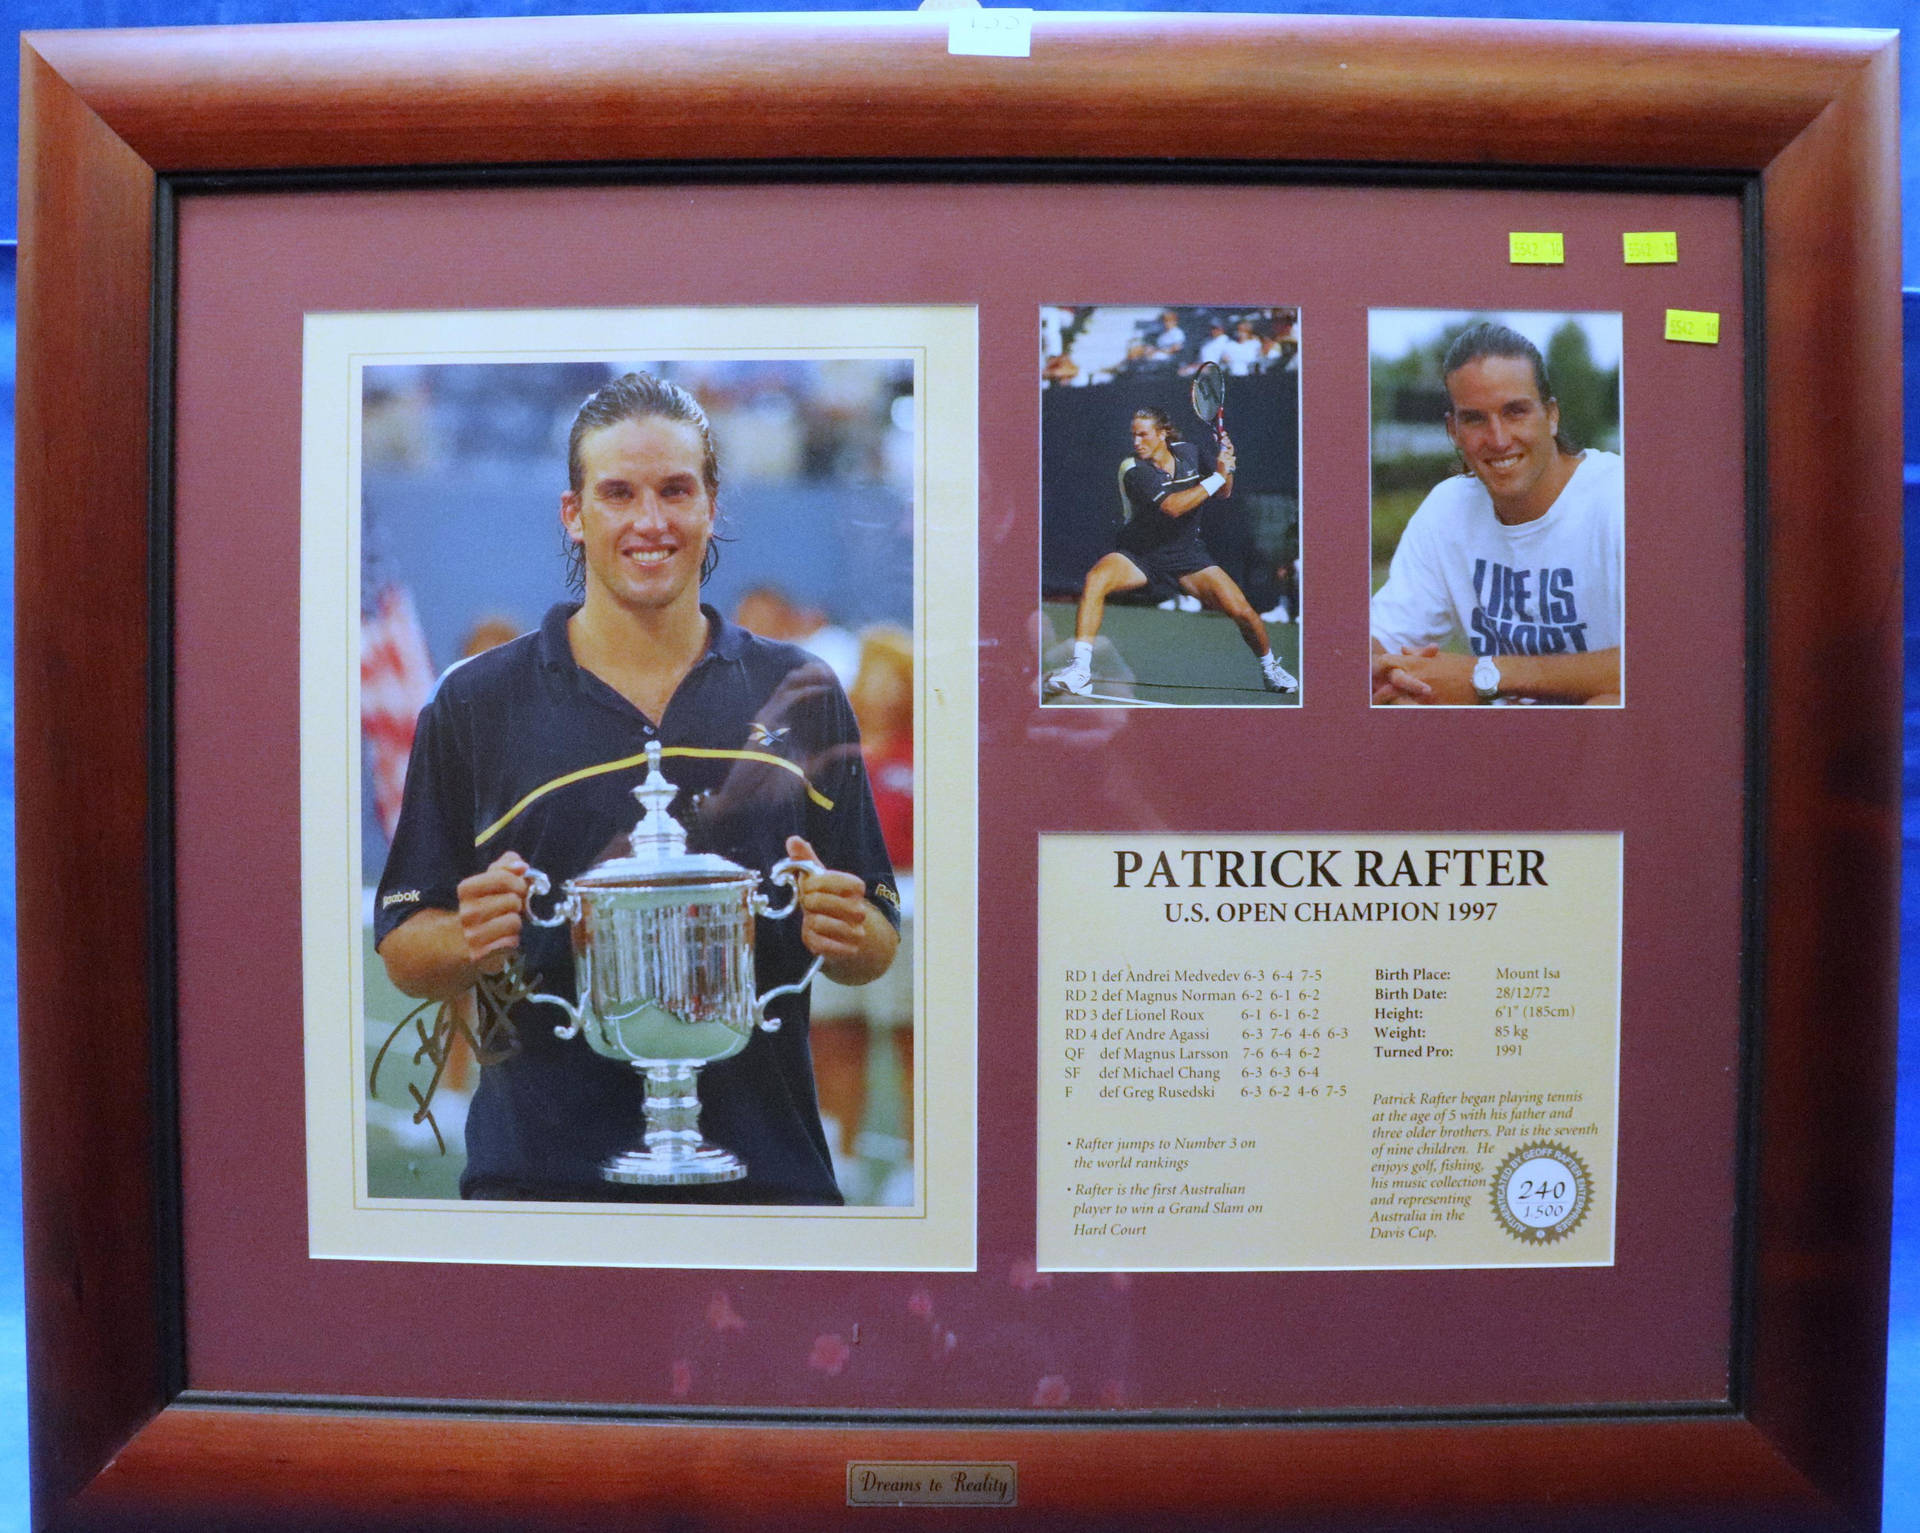 Patrick Rafter at his victorious moment in US Open Wallpaper